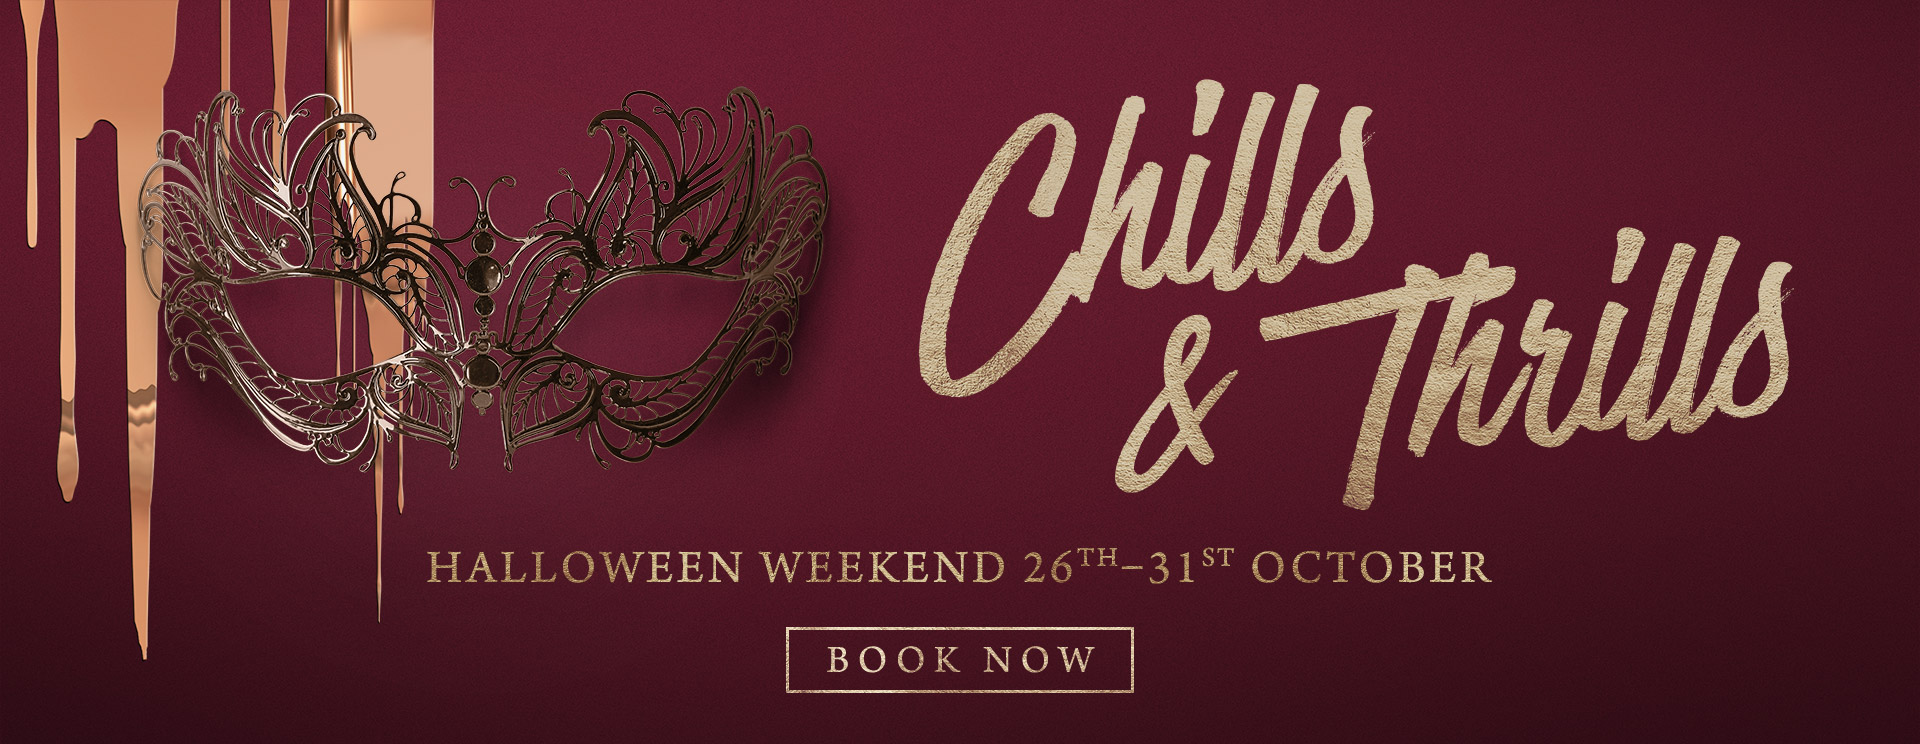 Chills & Thrills this Halloween at The Nag's Head